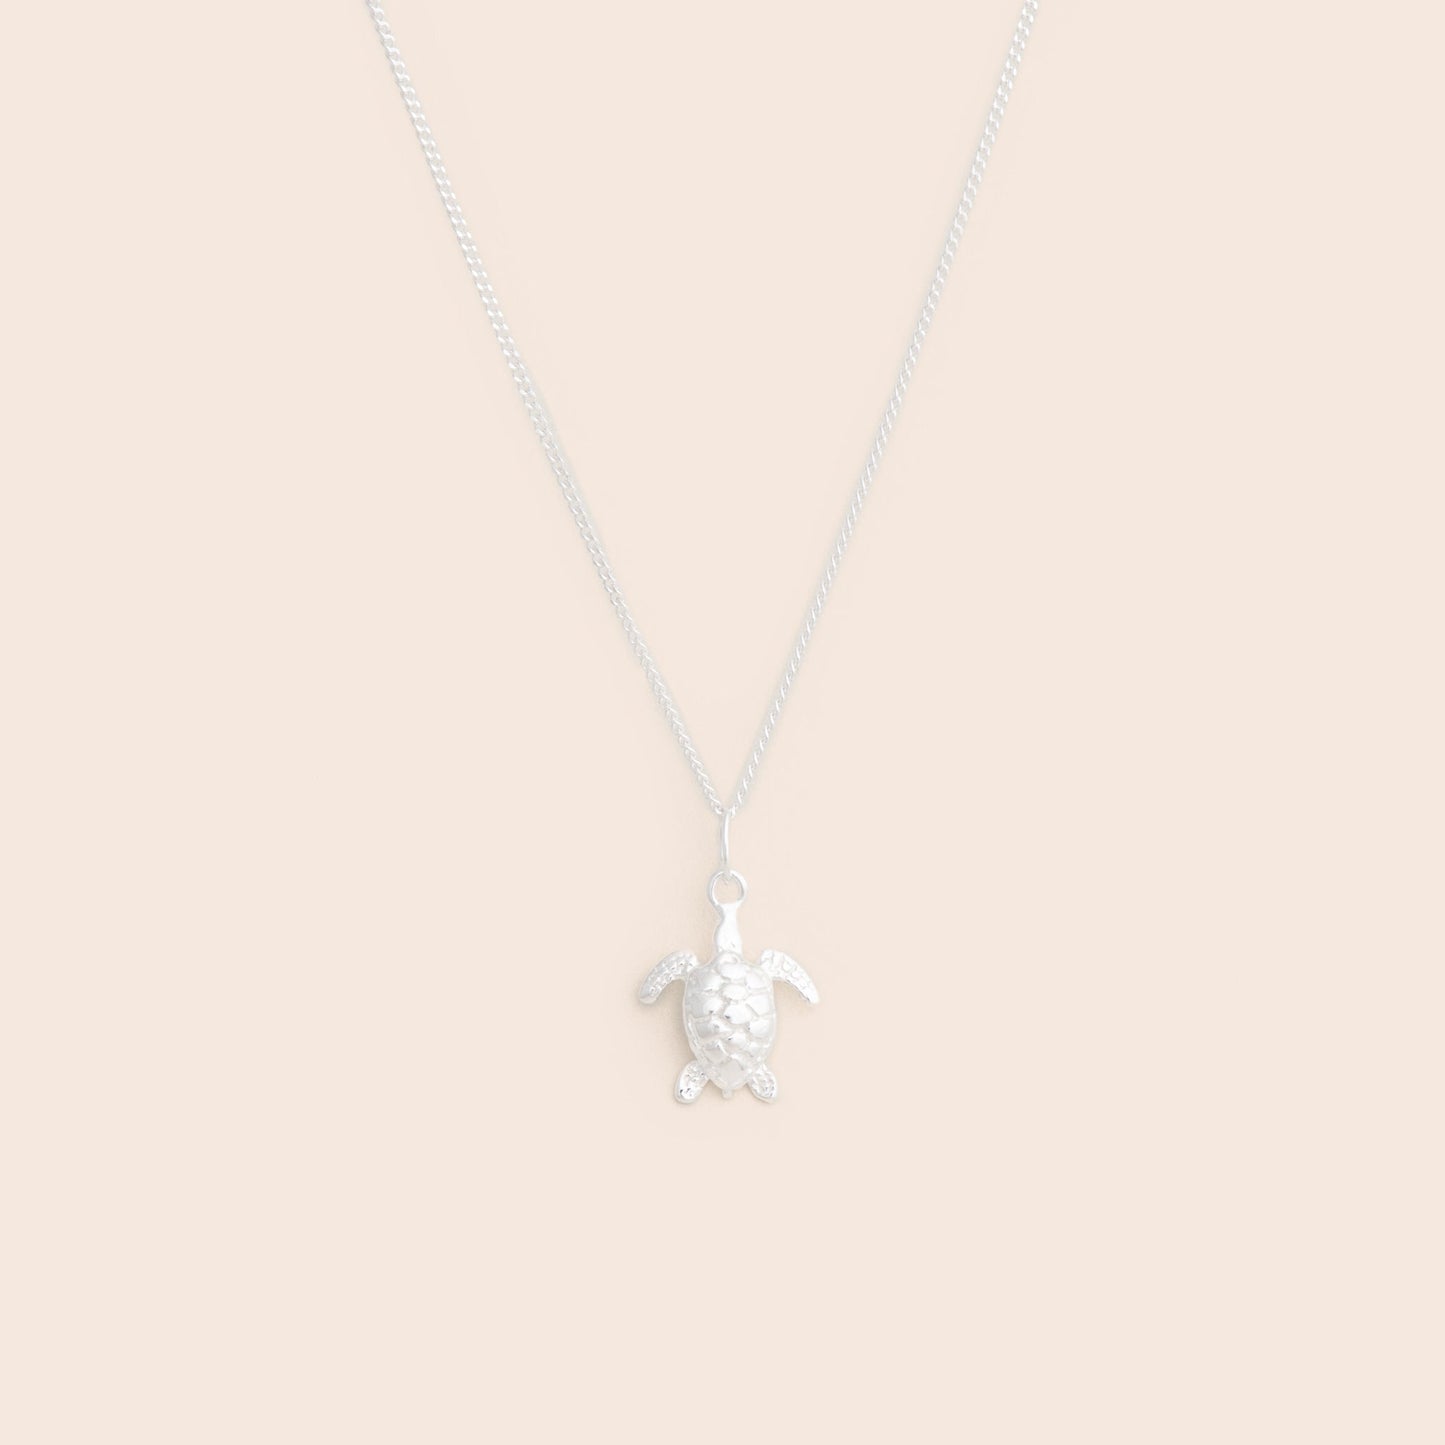 Silver Sea Turtle Necklace - Sterling Silver - Gemlet